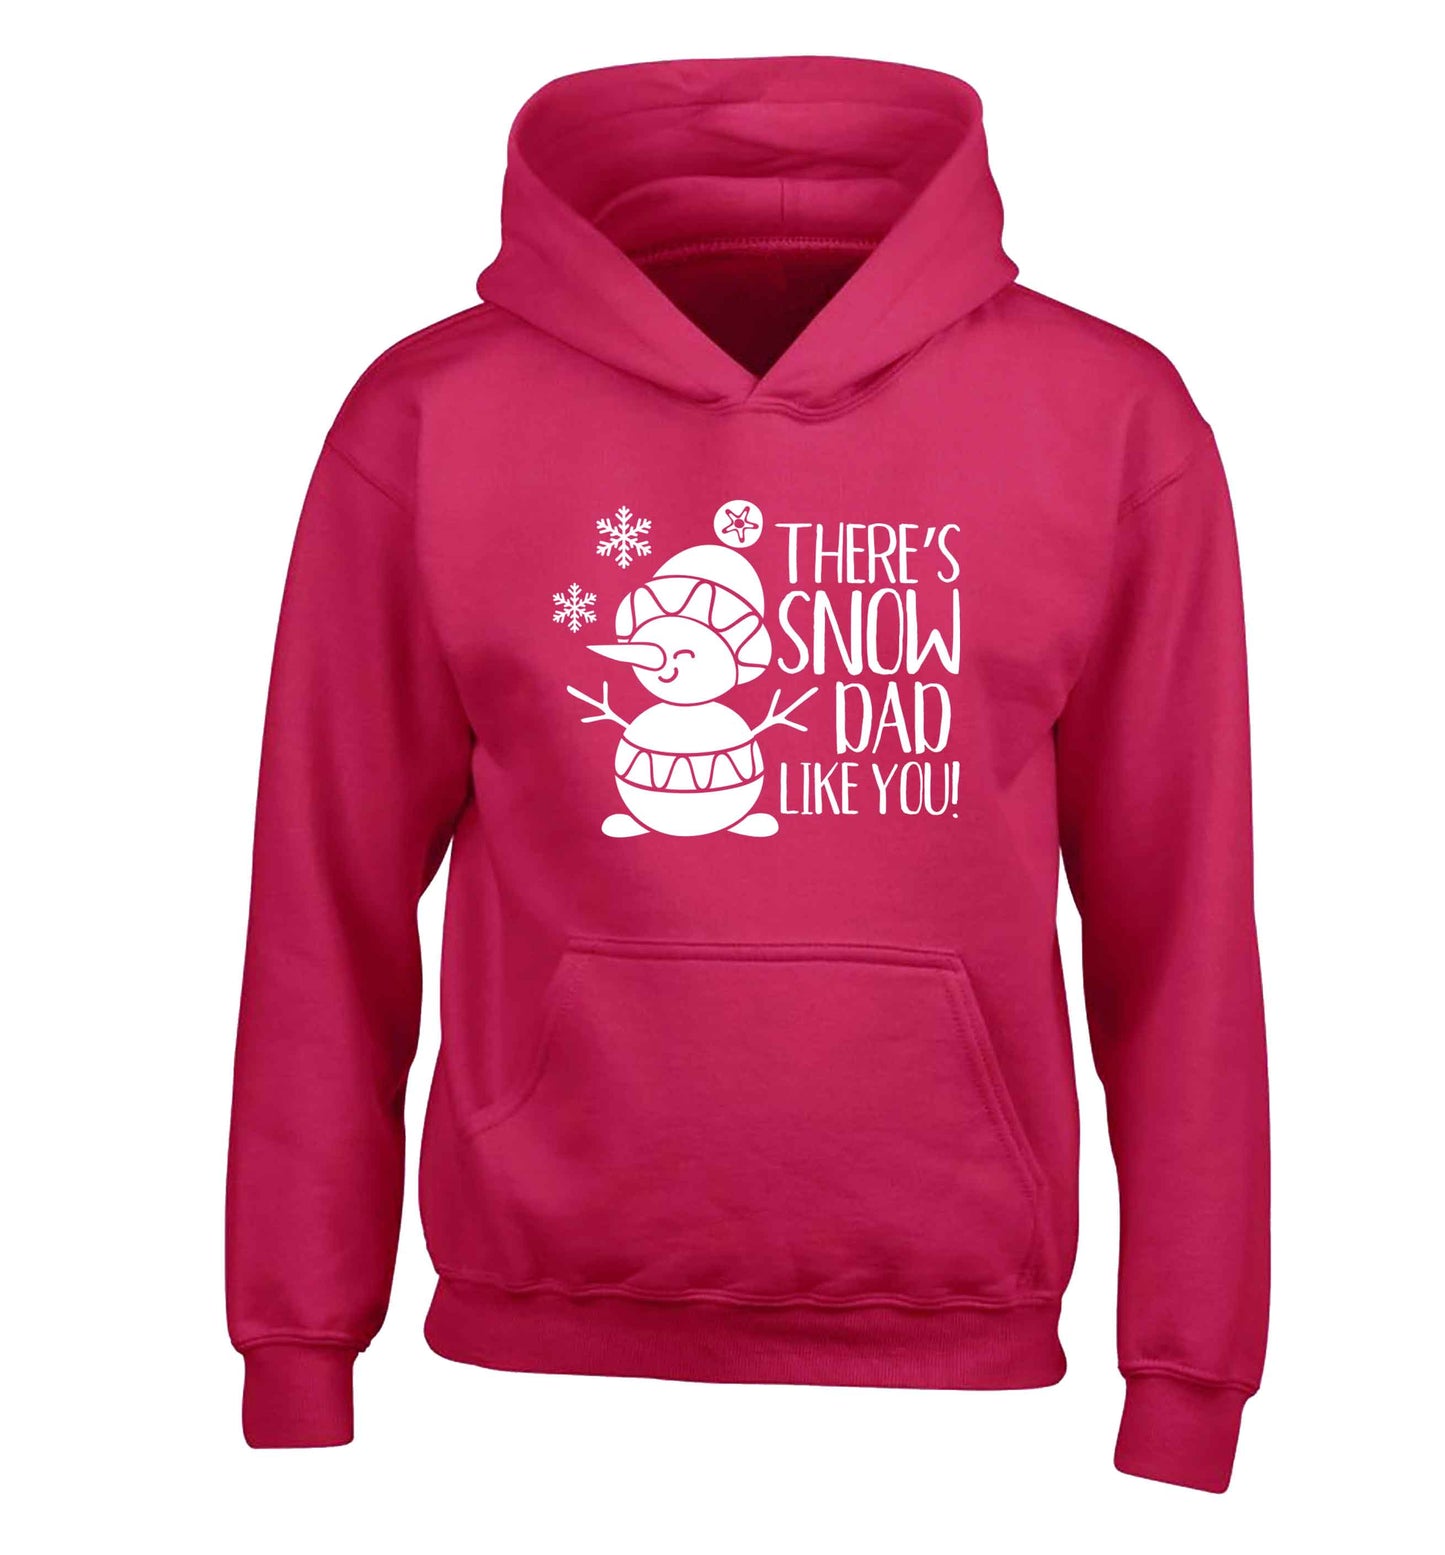 There's snow dad like you children's pink hoodie 12-13 Years